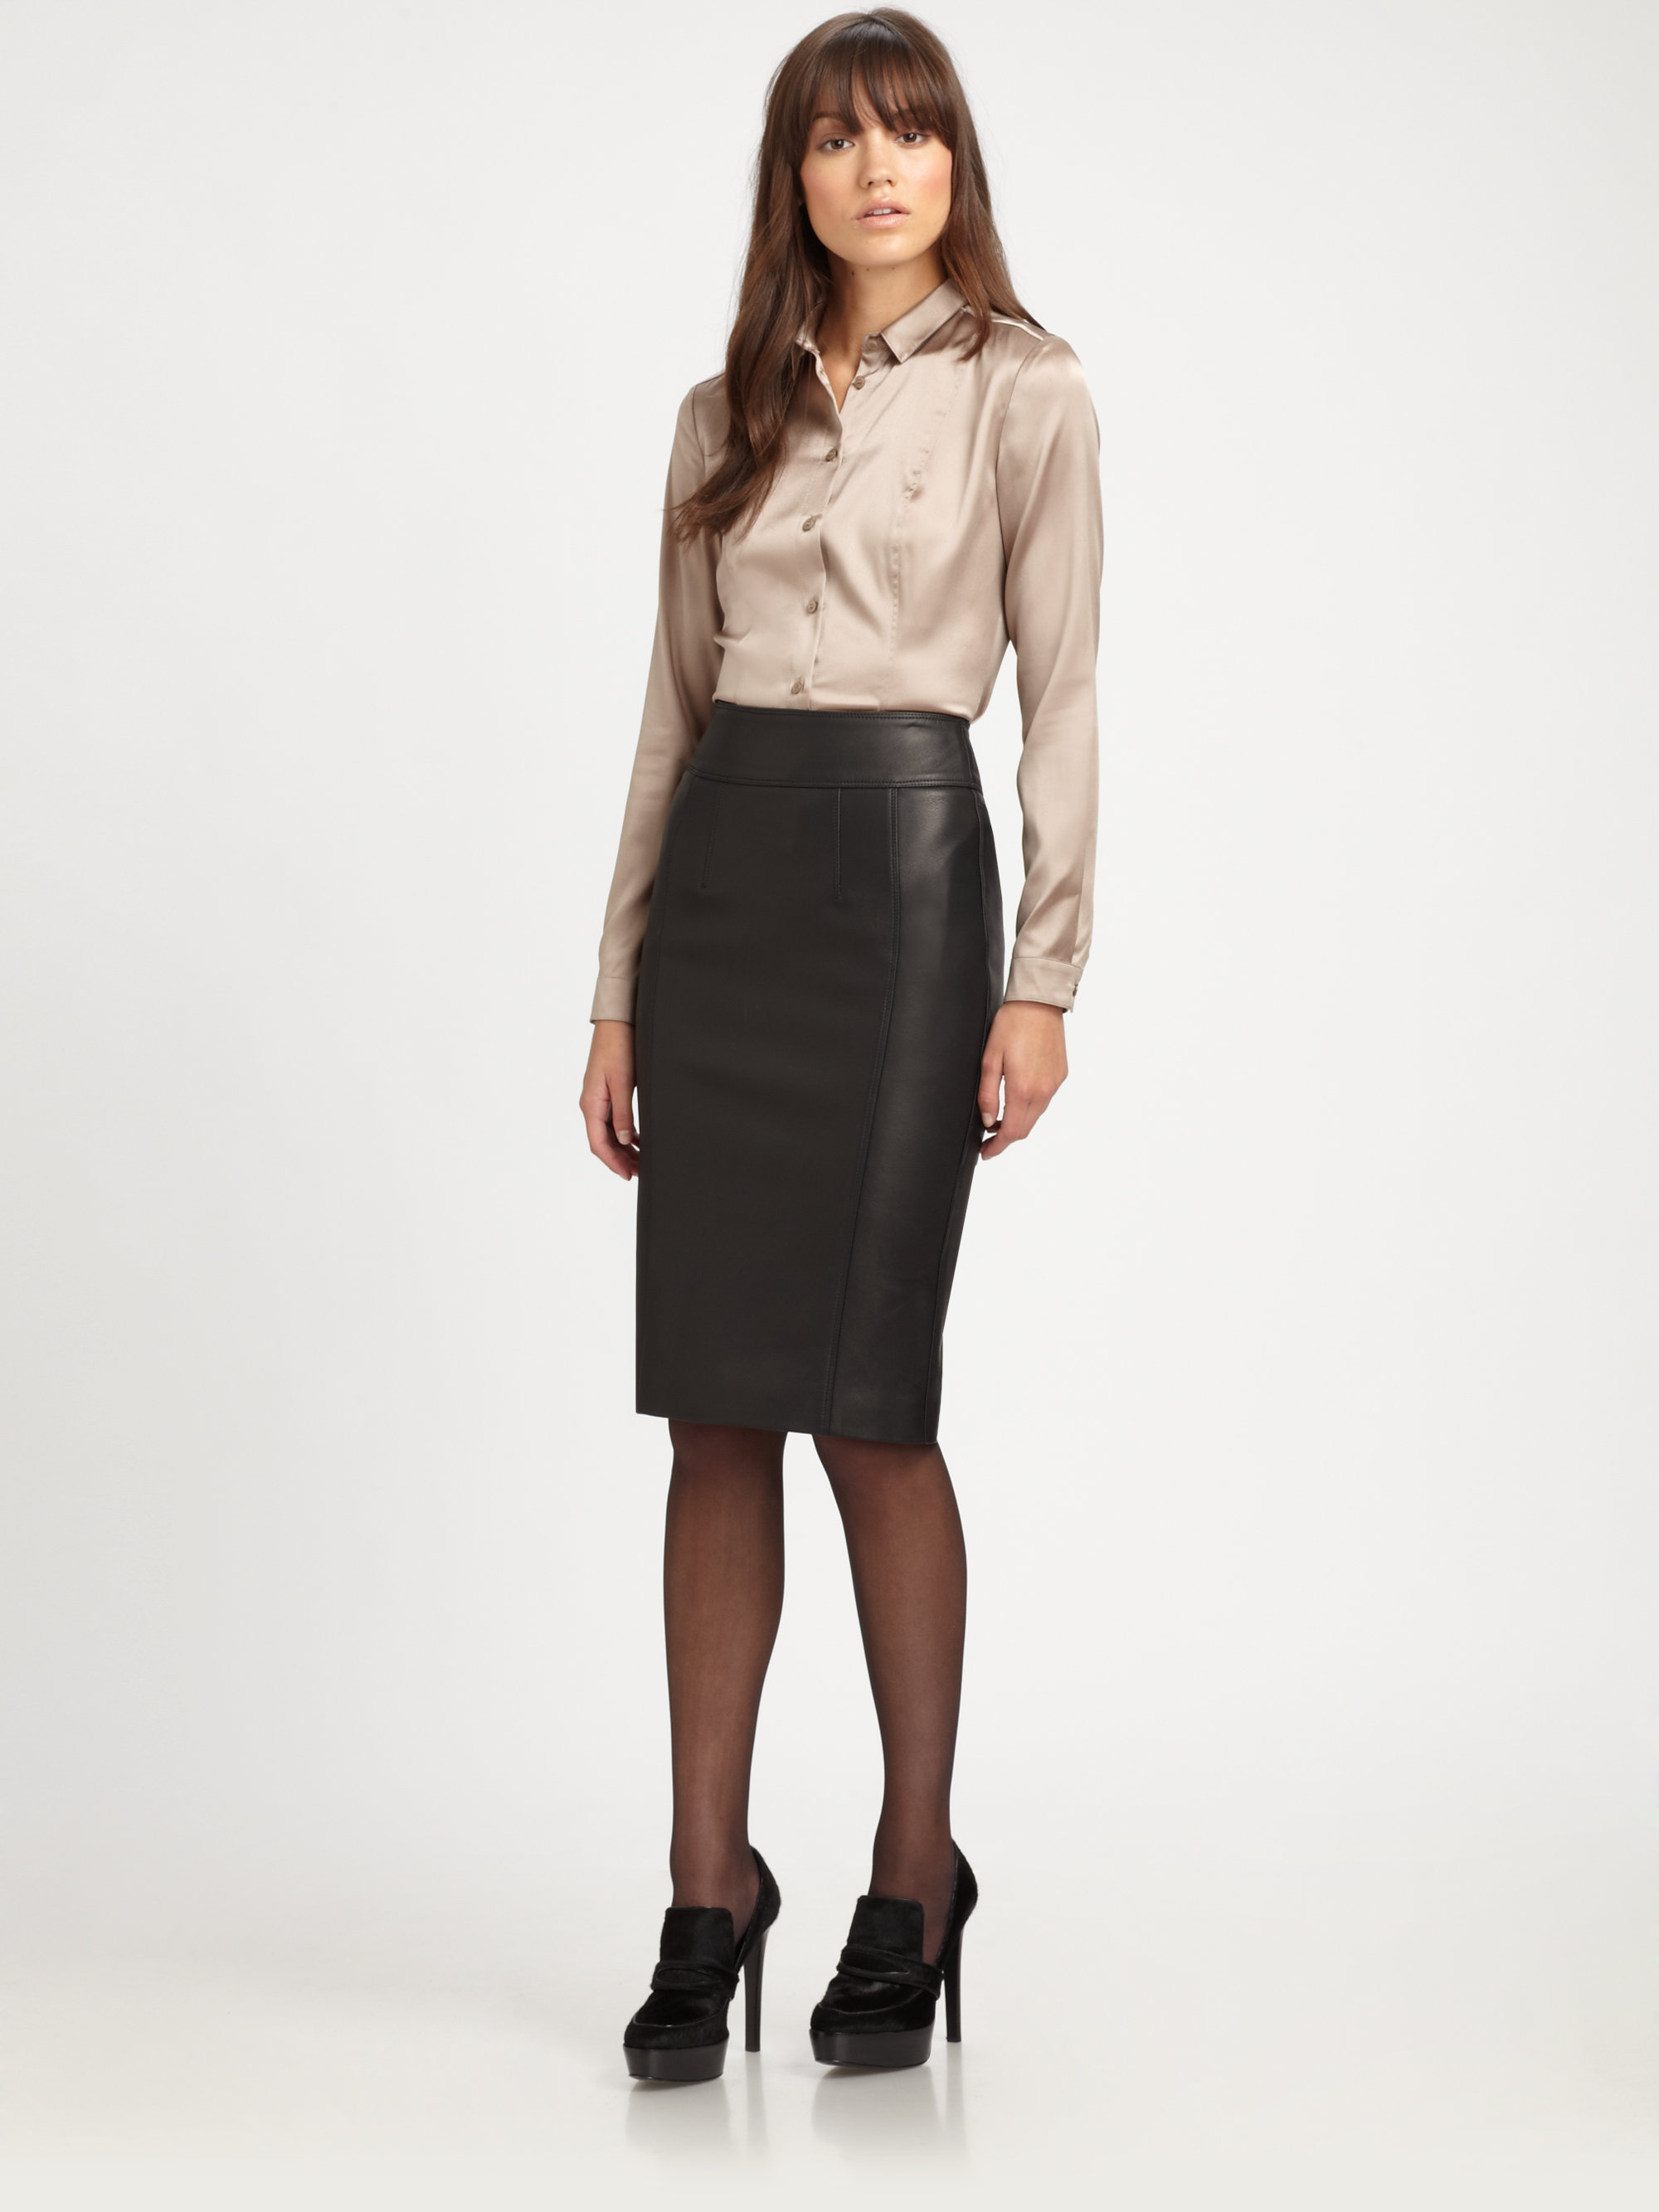 Leather Pencil Skirt Versatile Lasting And Fashionable 